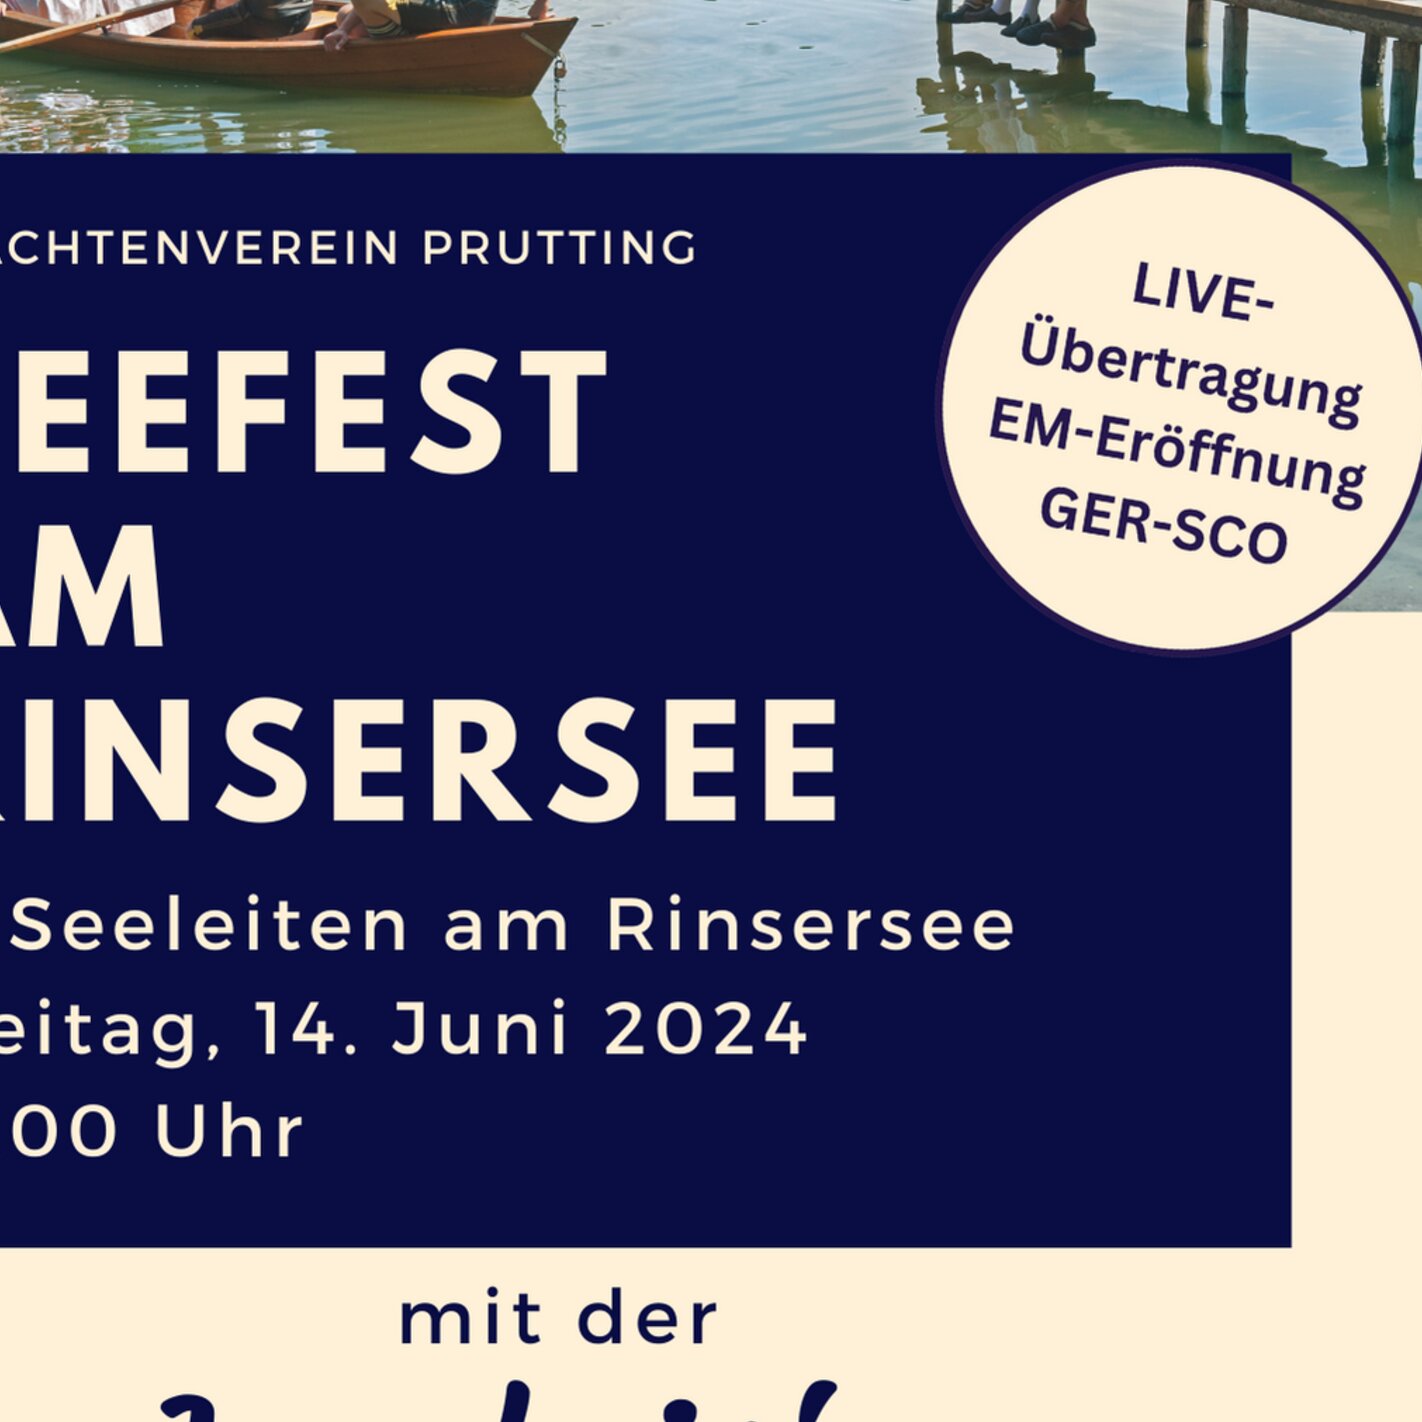 Seefest am Rinsersee